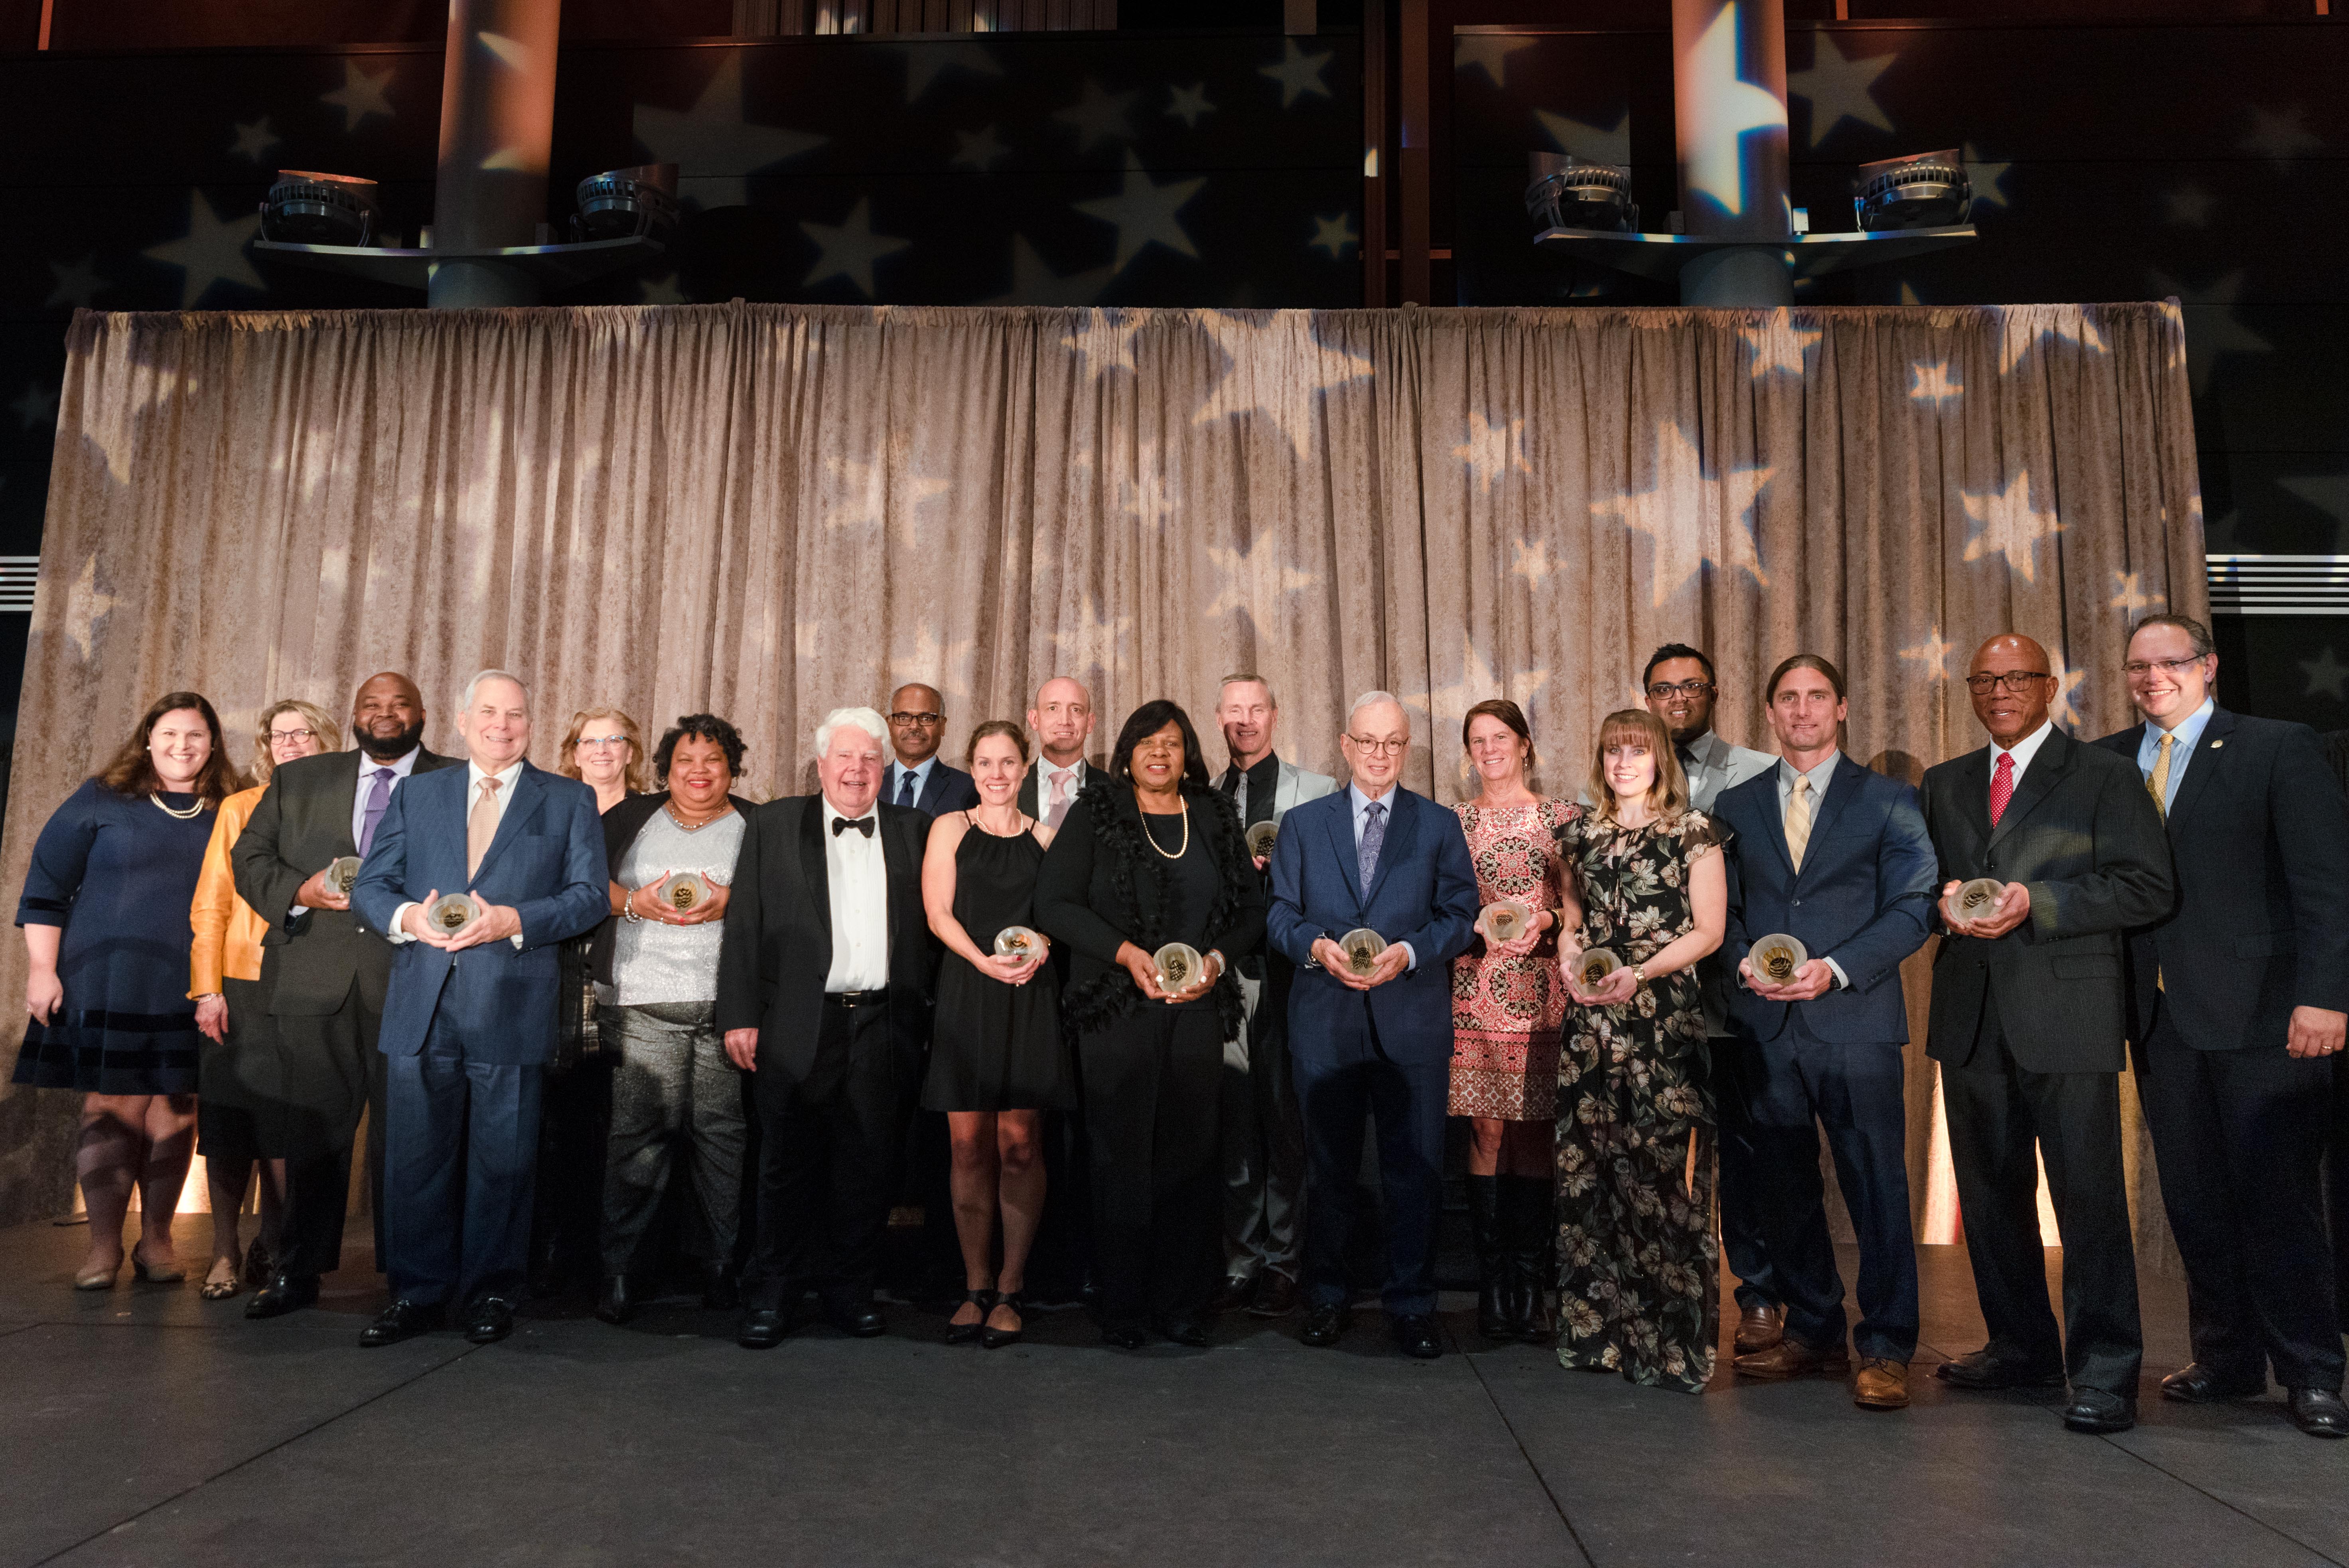 A photo of the winners of the 2019 Alumni Stars awards